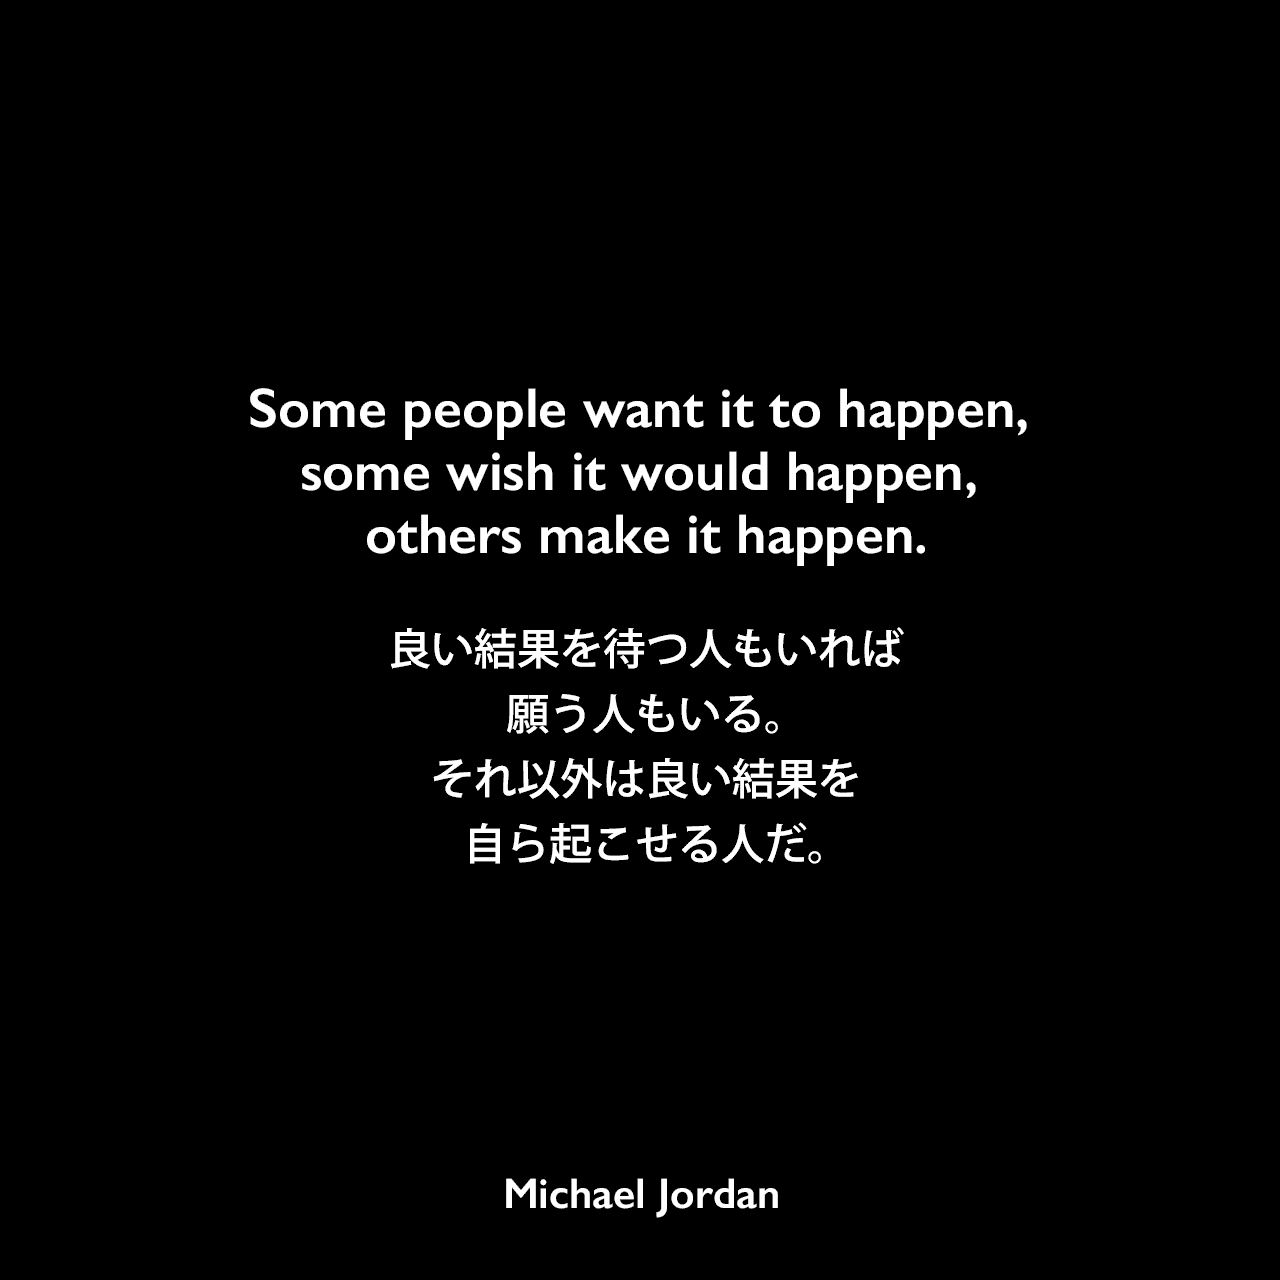 Some people want it to happen, some wish it would happen, others make it happen.良い結果を待つ人もいれば、願う人もいる。それ以外は良い結果を自ら起こせる人だ。